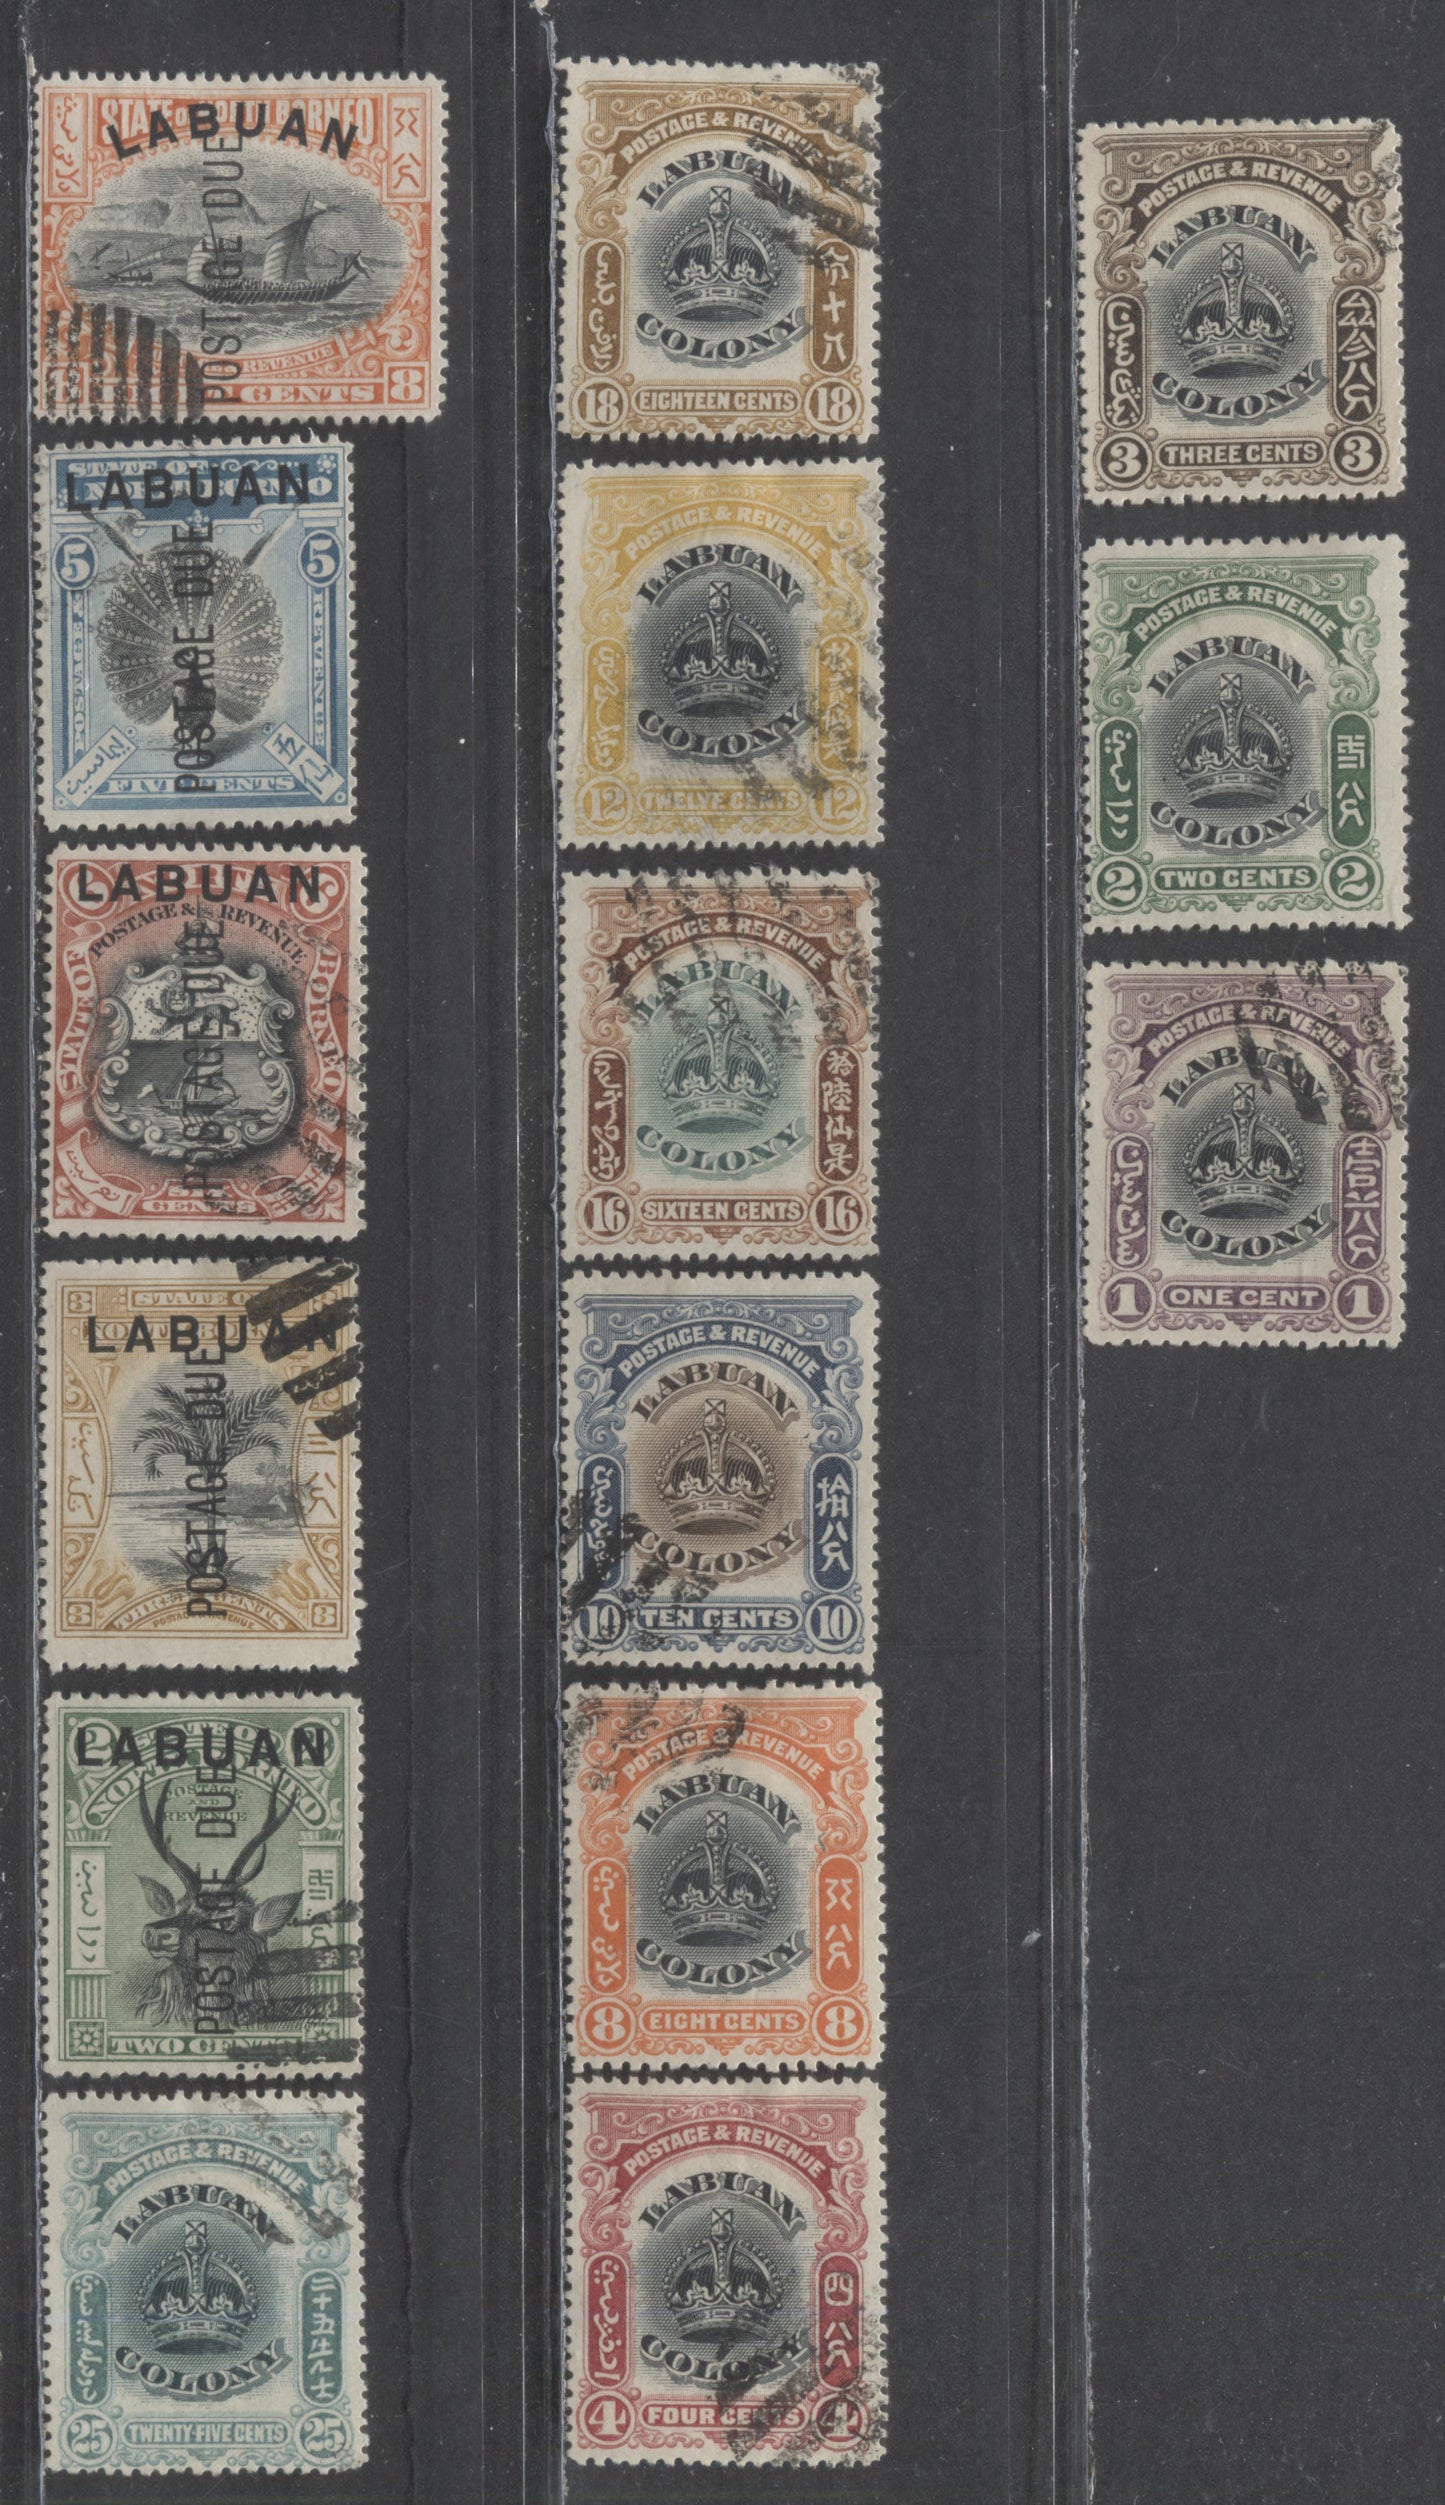 Lot 439 Labuan SC#99a/J6e 1901-1903 Crown Definitives & Postage Dues, 14 Fine/Very Fine Used Singles, Click on Listing to See ALL Pictures, 2022 Scott Classic Cat. $18.55 USD